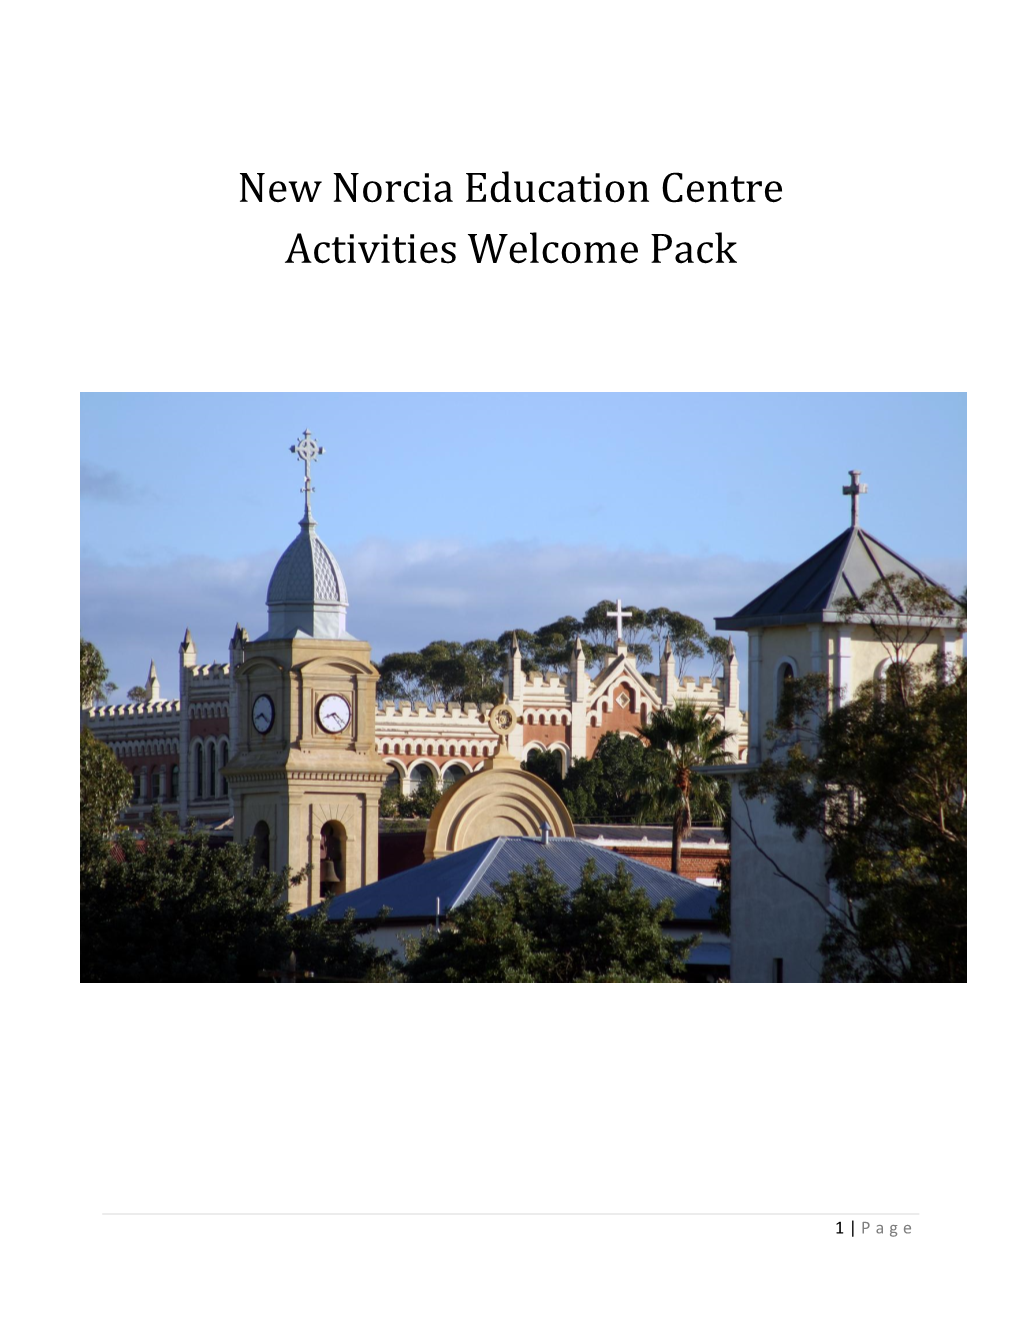 New Norcia Education Centre Activities Welcome Pack